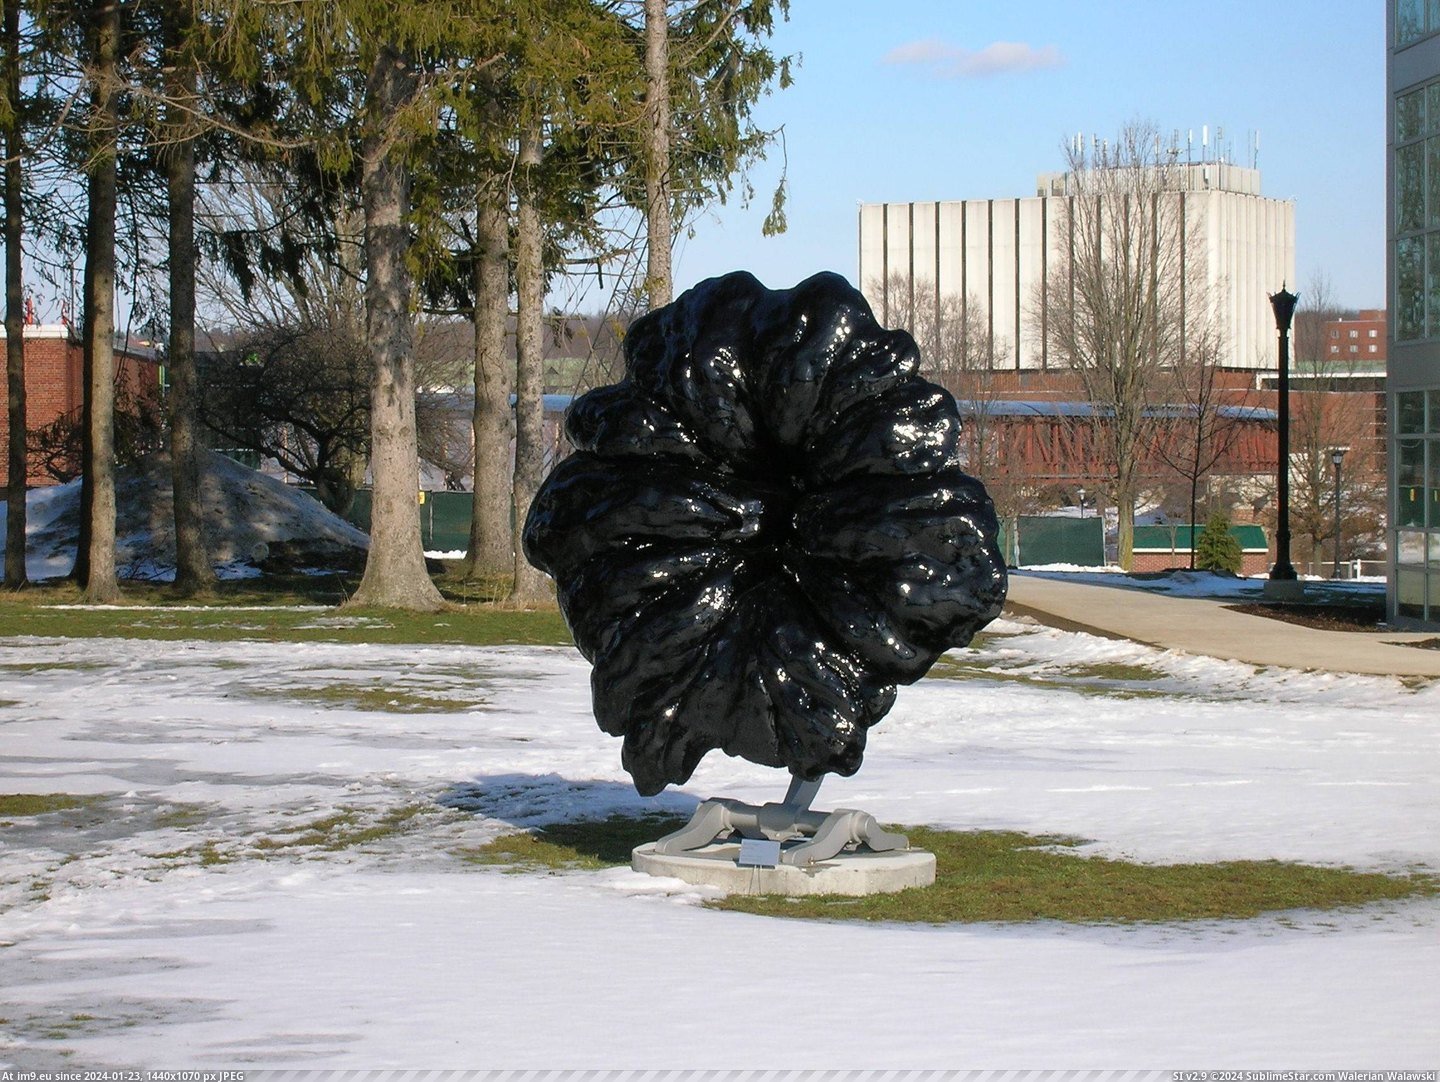 #Wtf #Art #Flower #Statue #Exhibits #Tha #Edinboro #Student #University #Showed [Wtf] A student at Edinboro University made this 'flower' statue and showed it in art exhibits. He later came forth and said tha Pic. (Image of album My r/WTF favs))